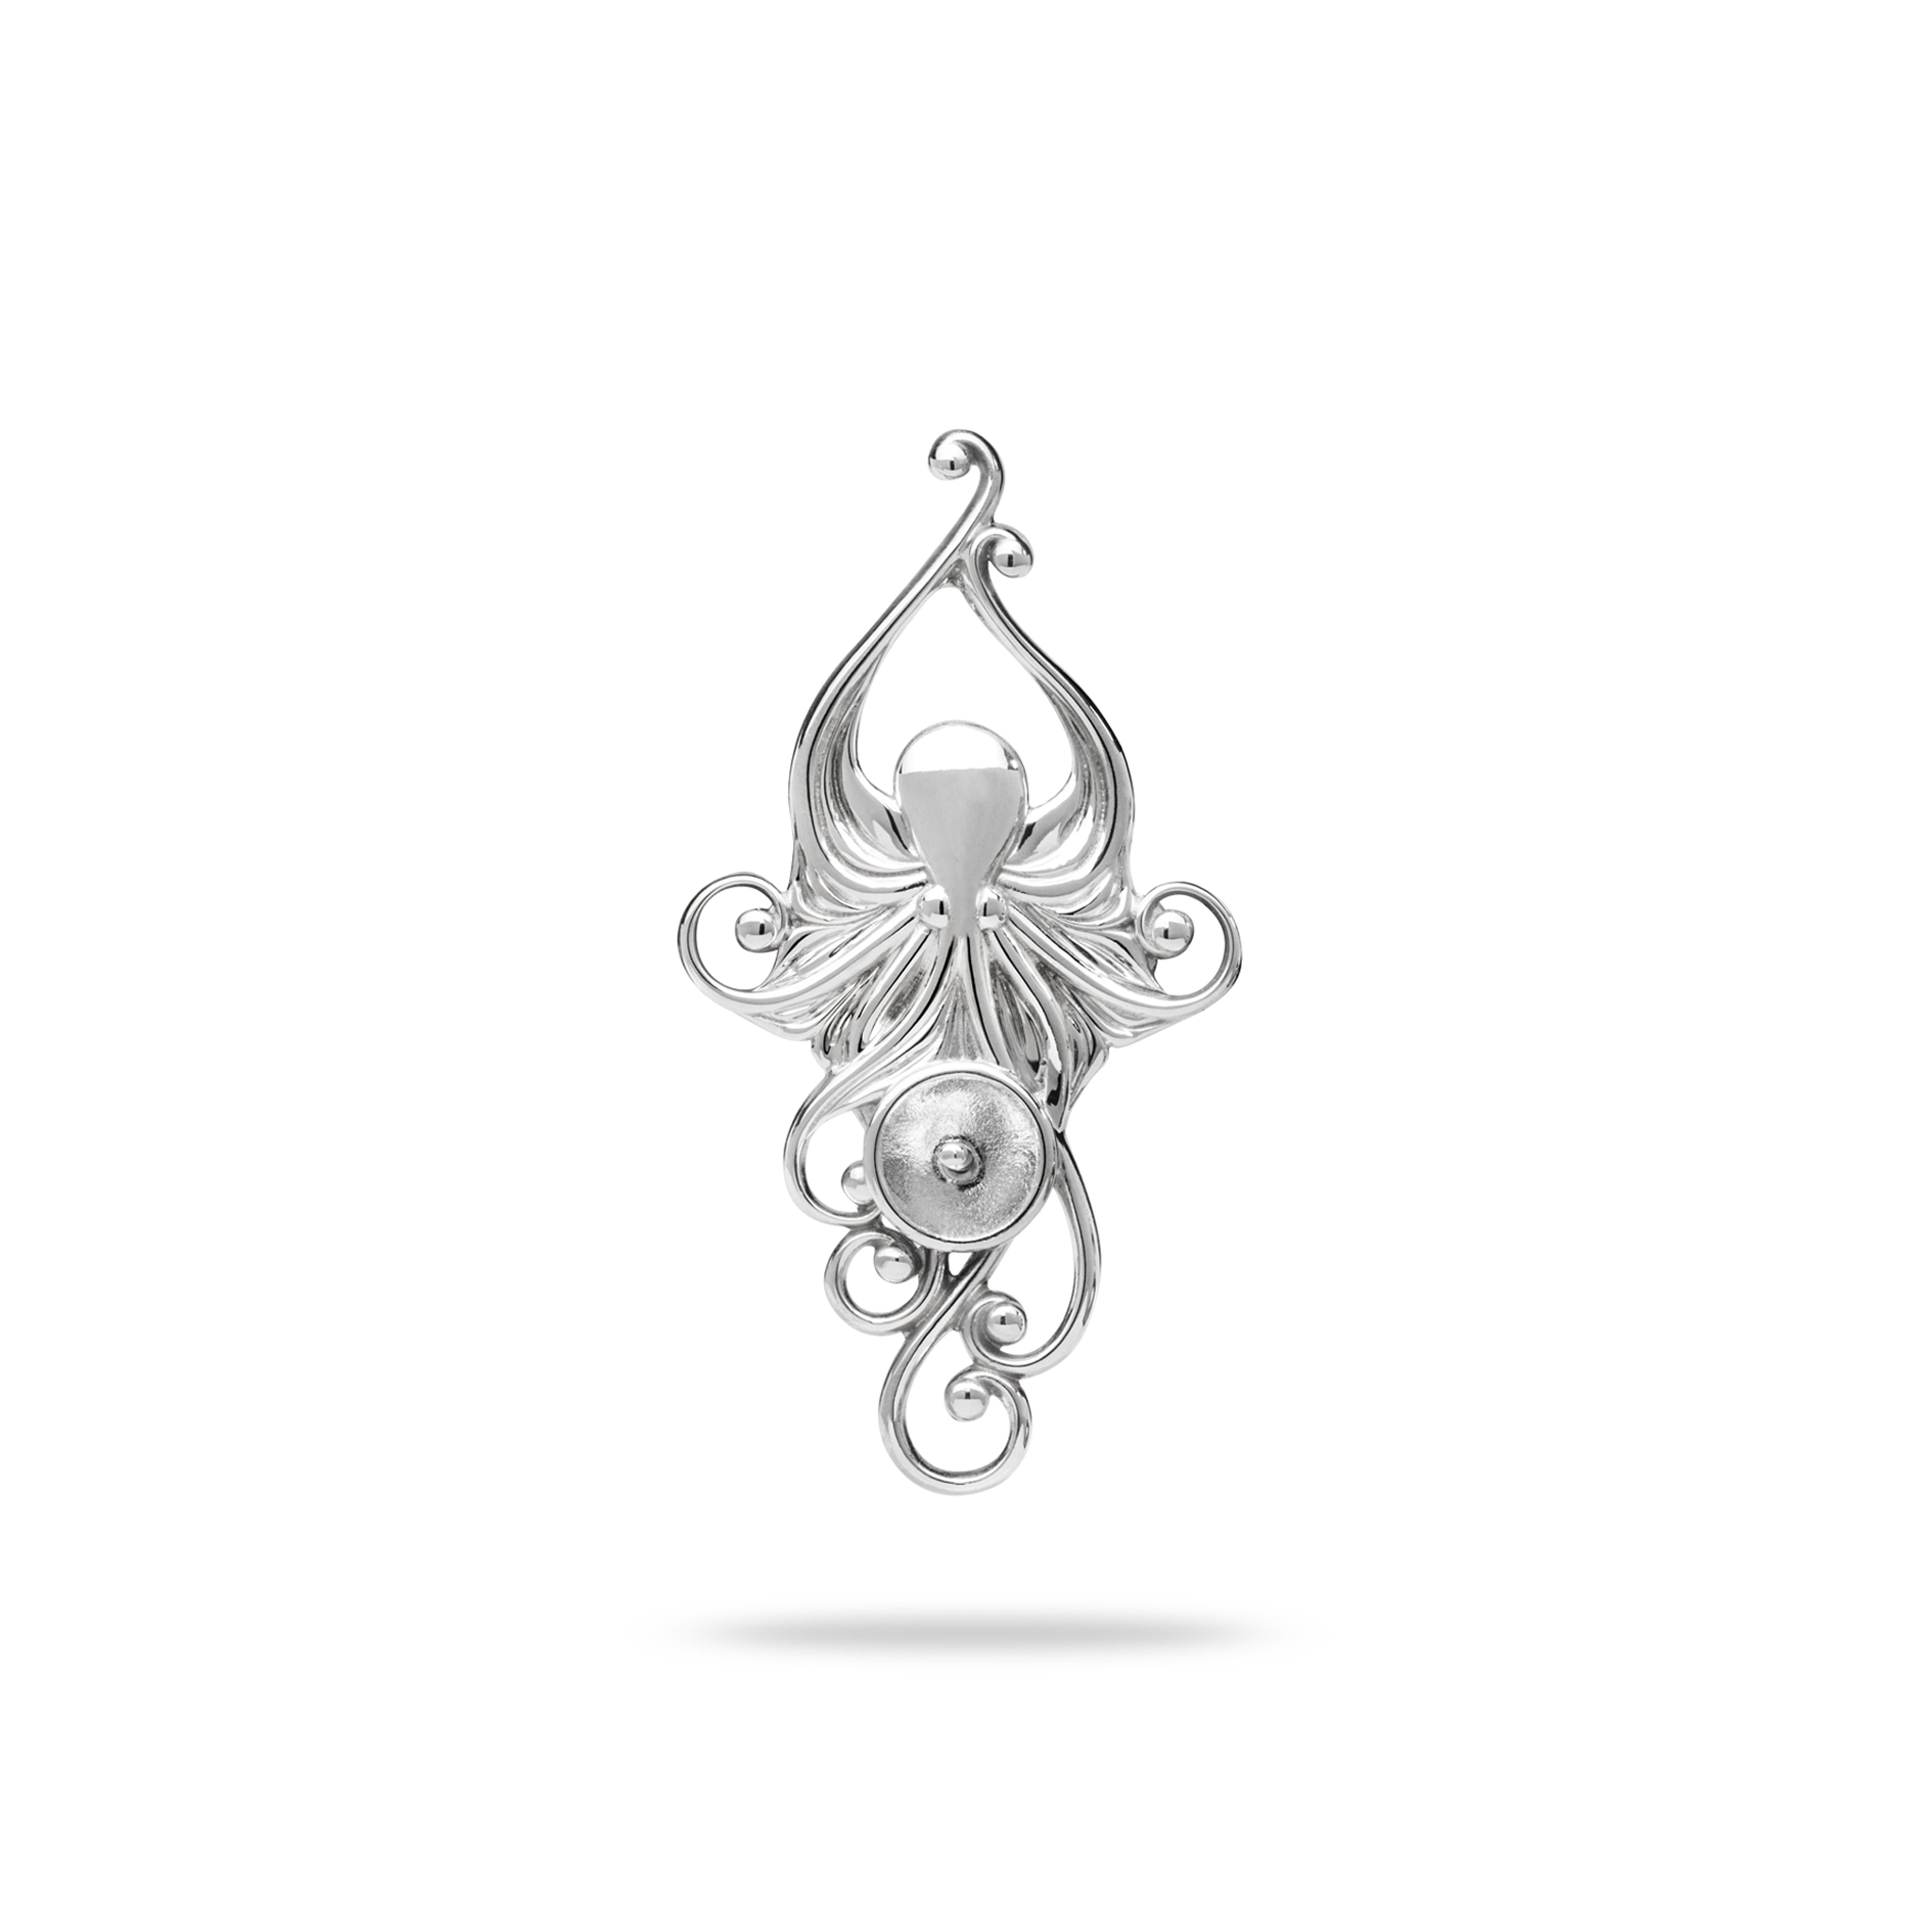 Pick A Pearl Living Heirloom Octopus Pendant in Sterling Silver - 36mm